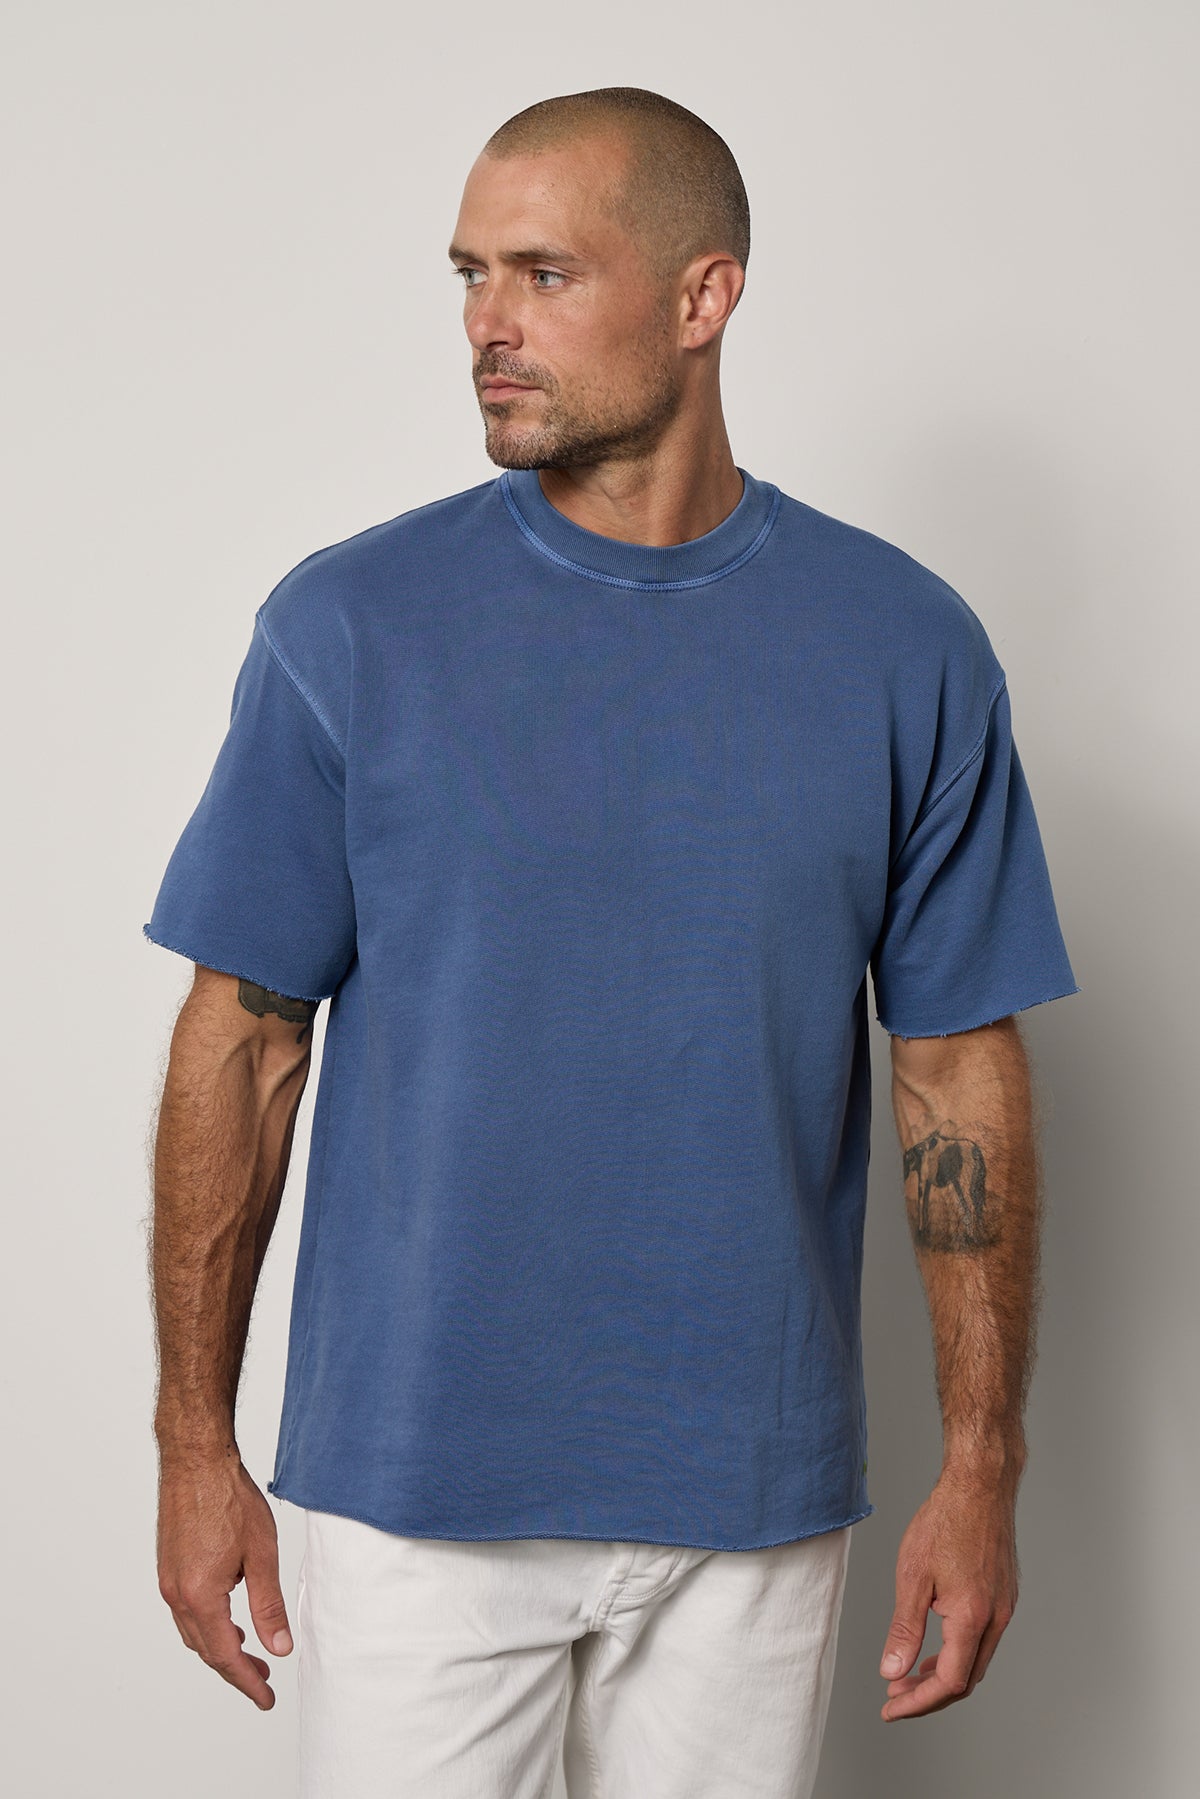   Saul Crew Neck Tee in anchor blue french terry and white denim front 